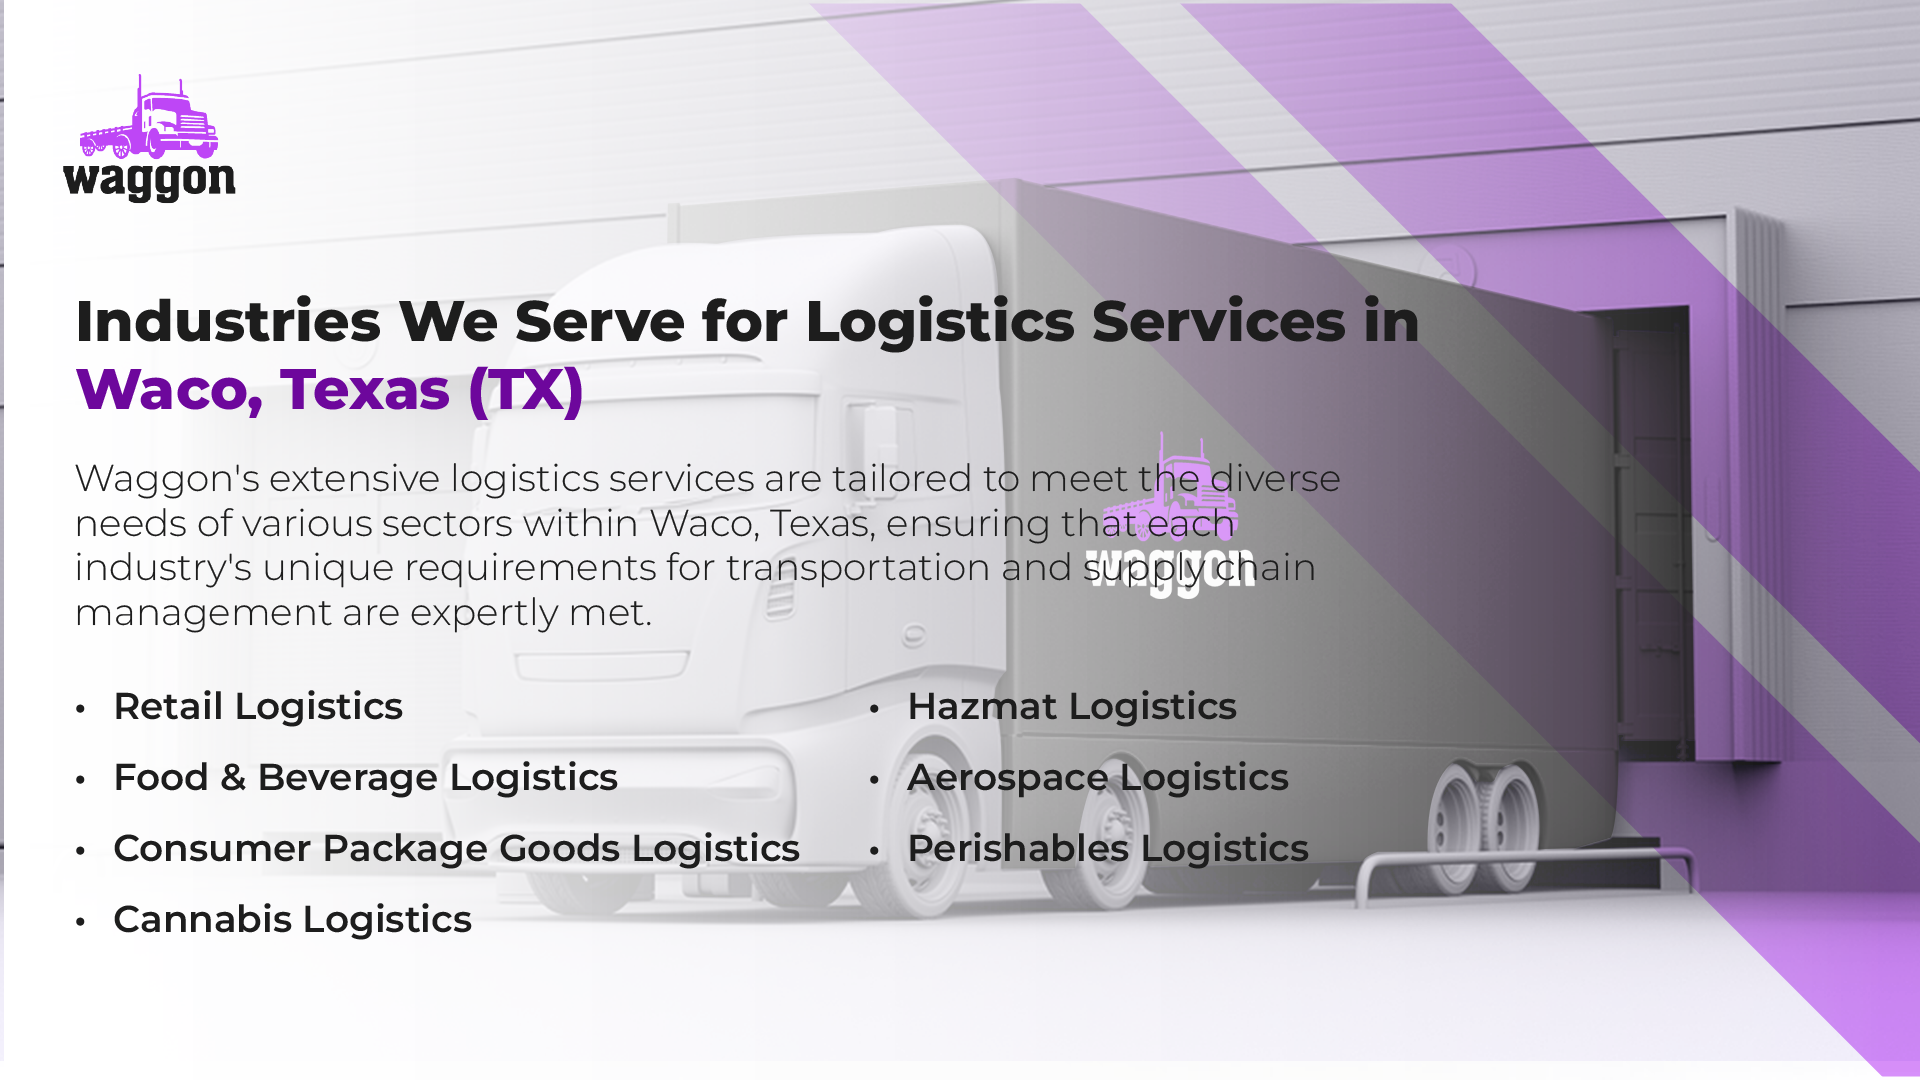 Industries We Serve for Logistics Services in Waco, Texas (TX)